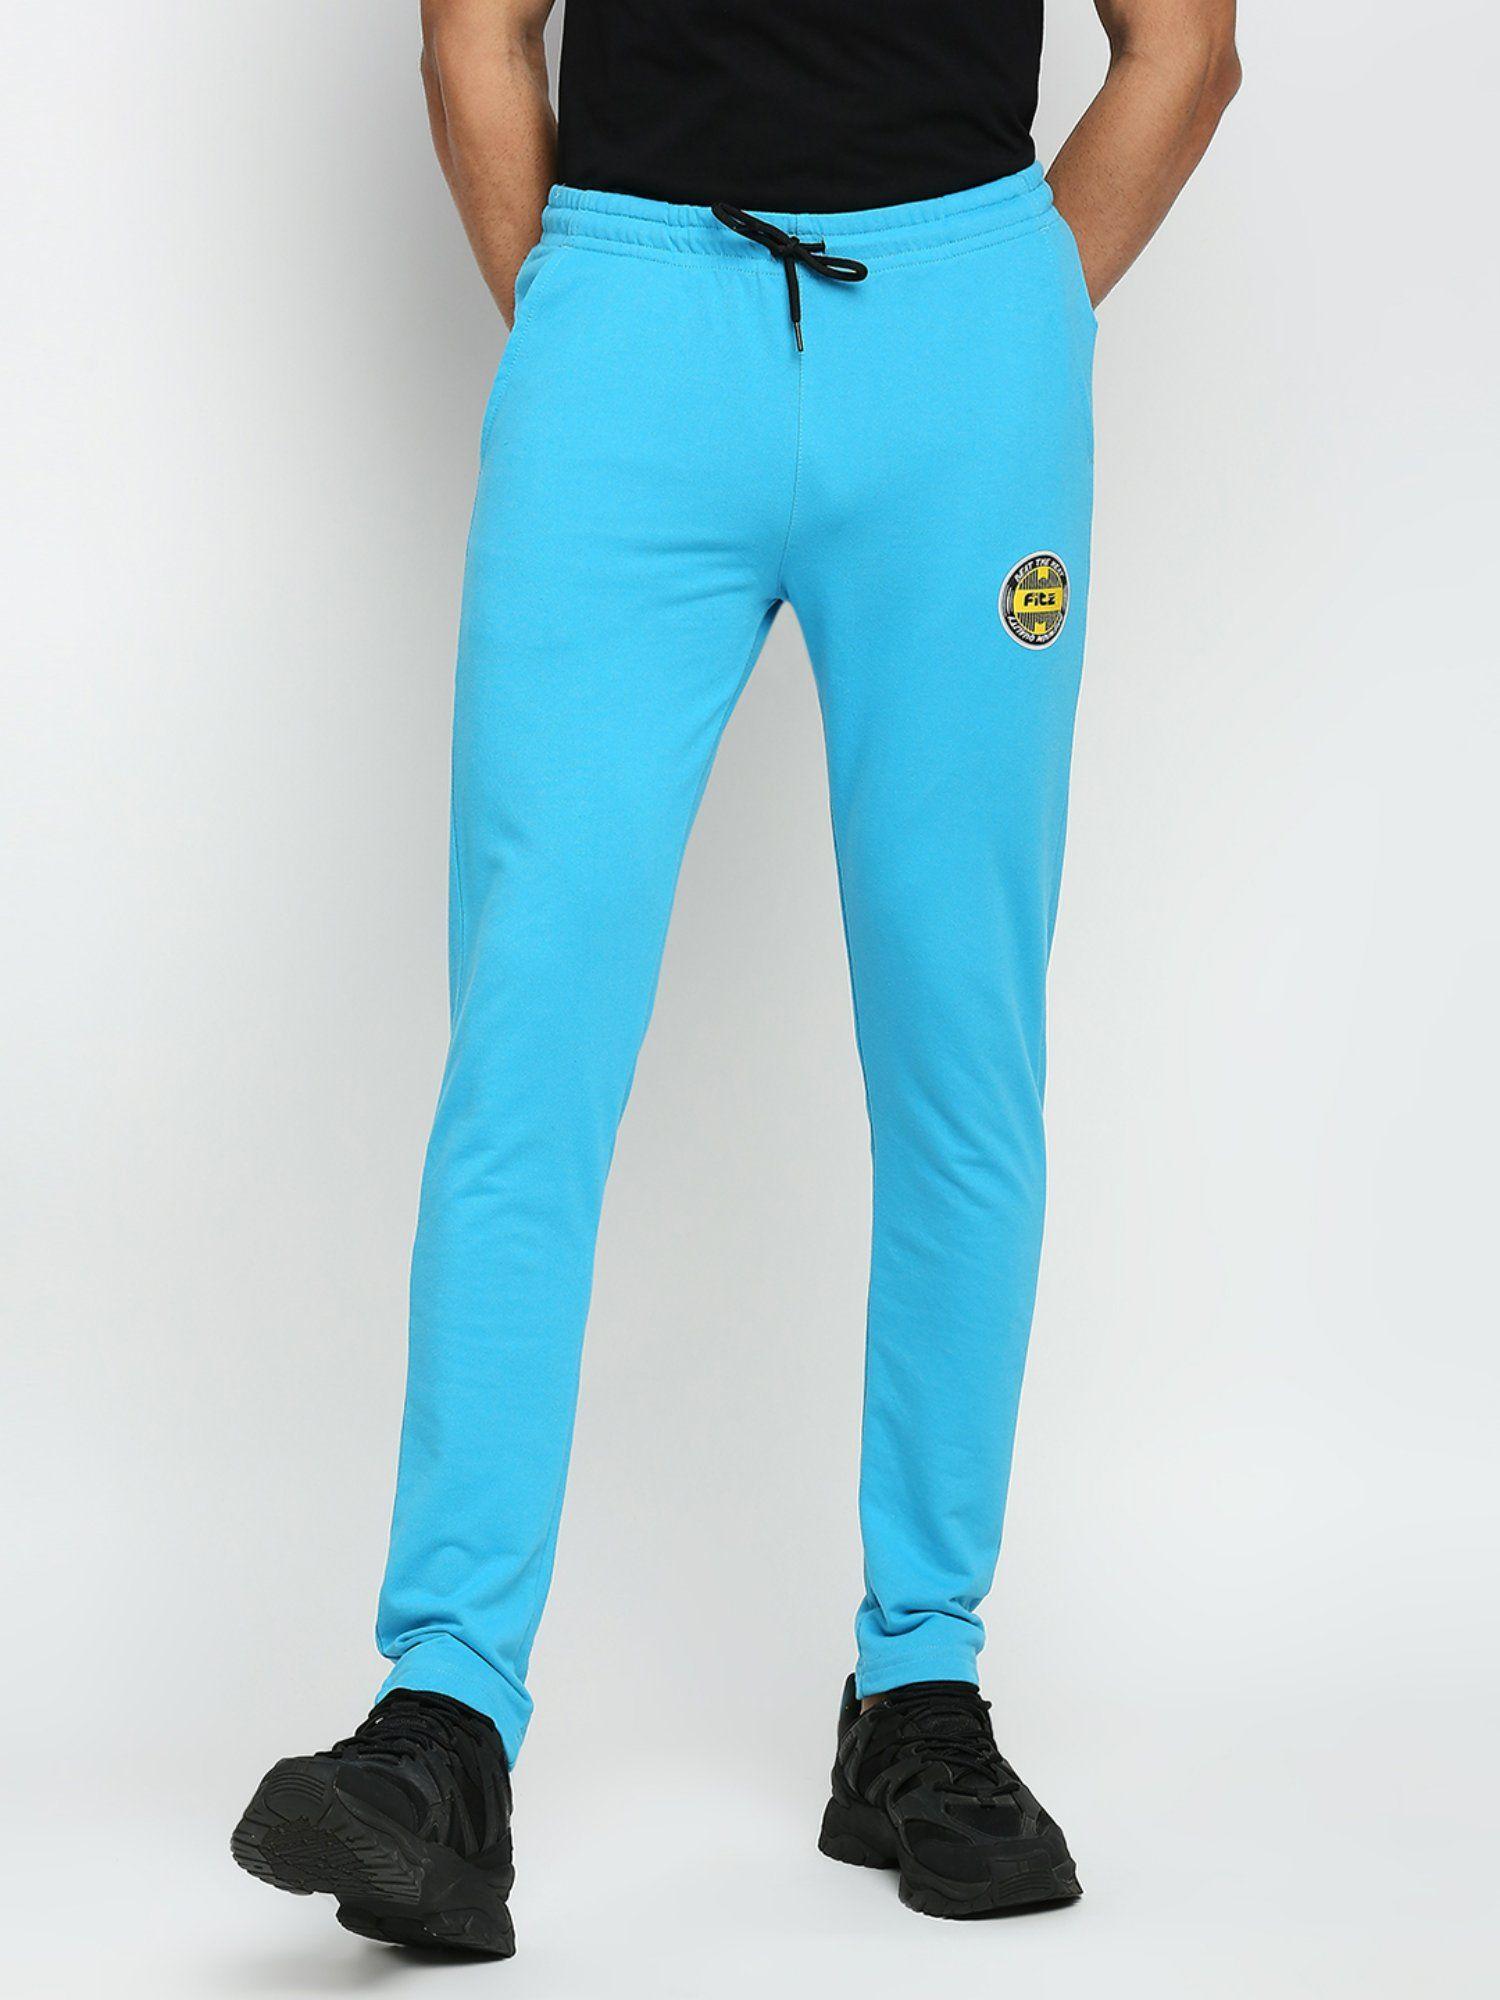 cotton polyester slim fit french terry knit joggers for mens - turquoise